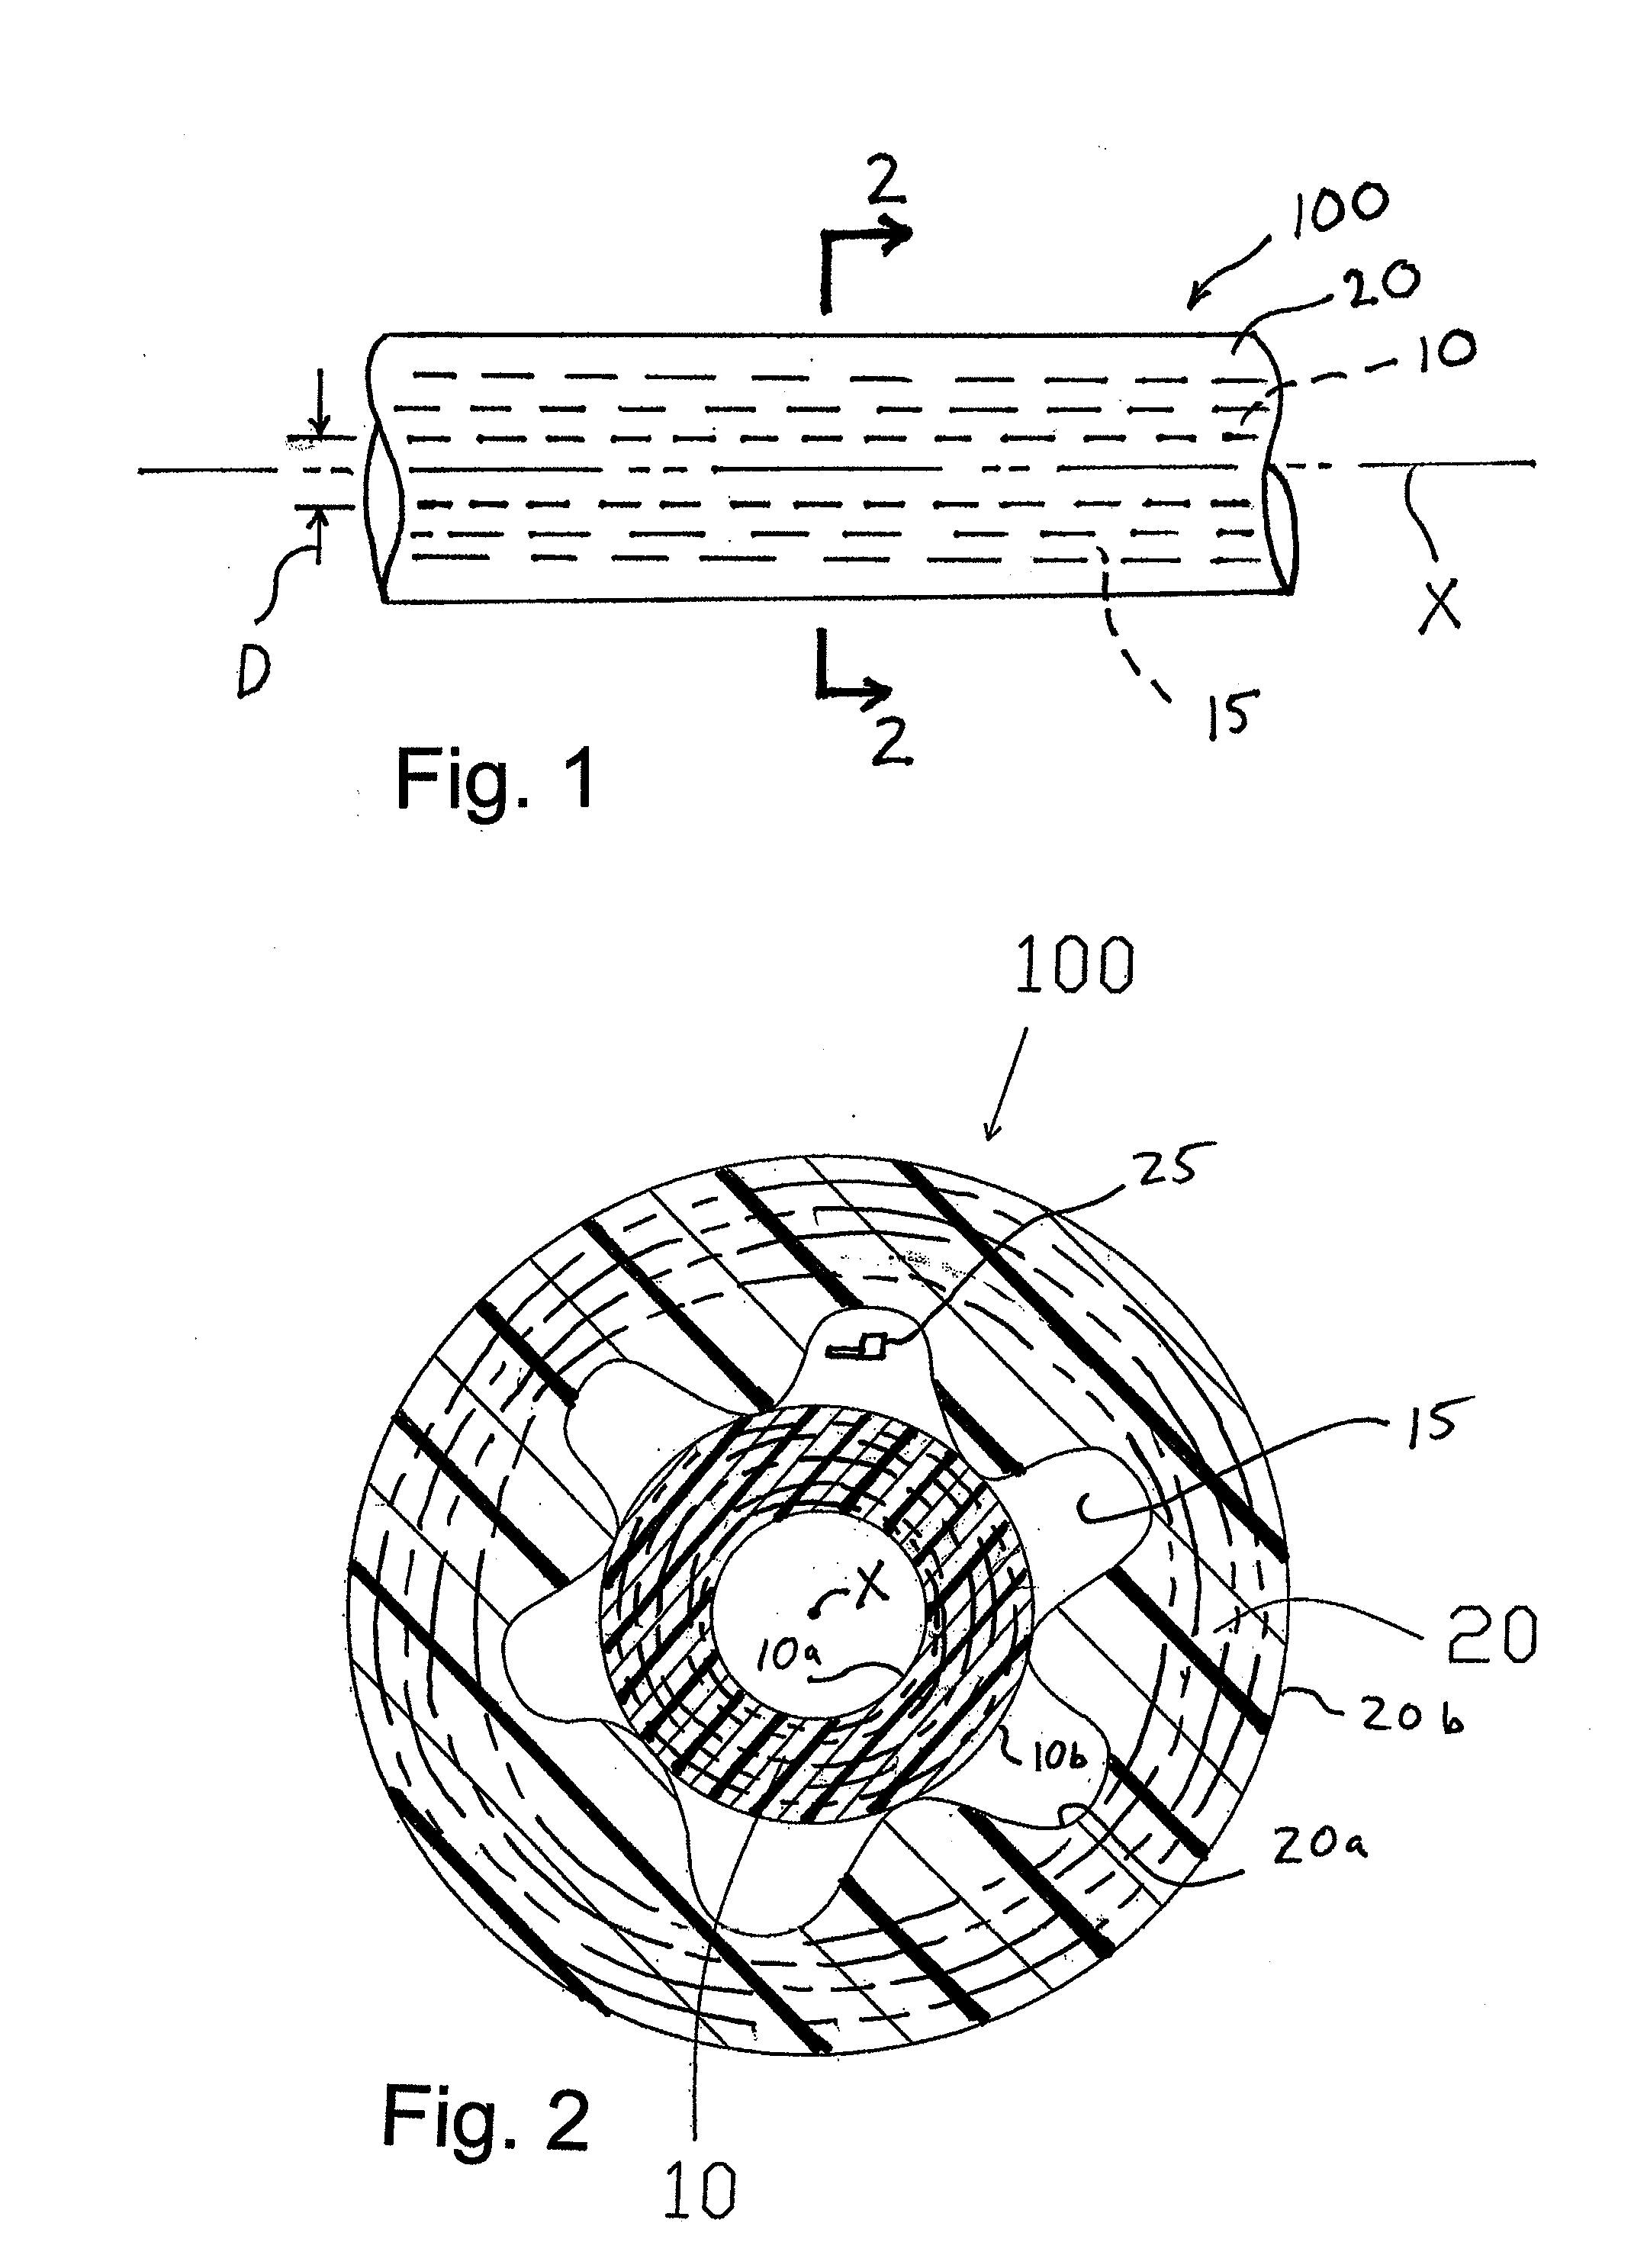 Dual-containment pipe containing fluoropolymer